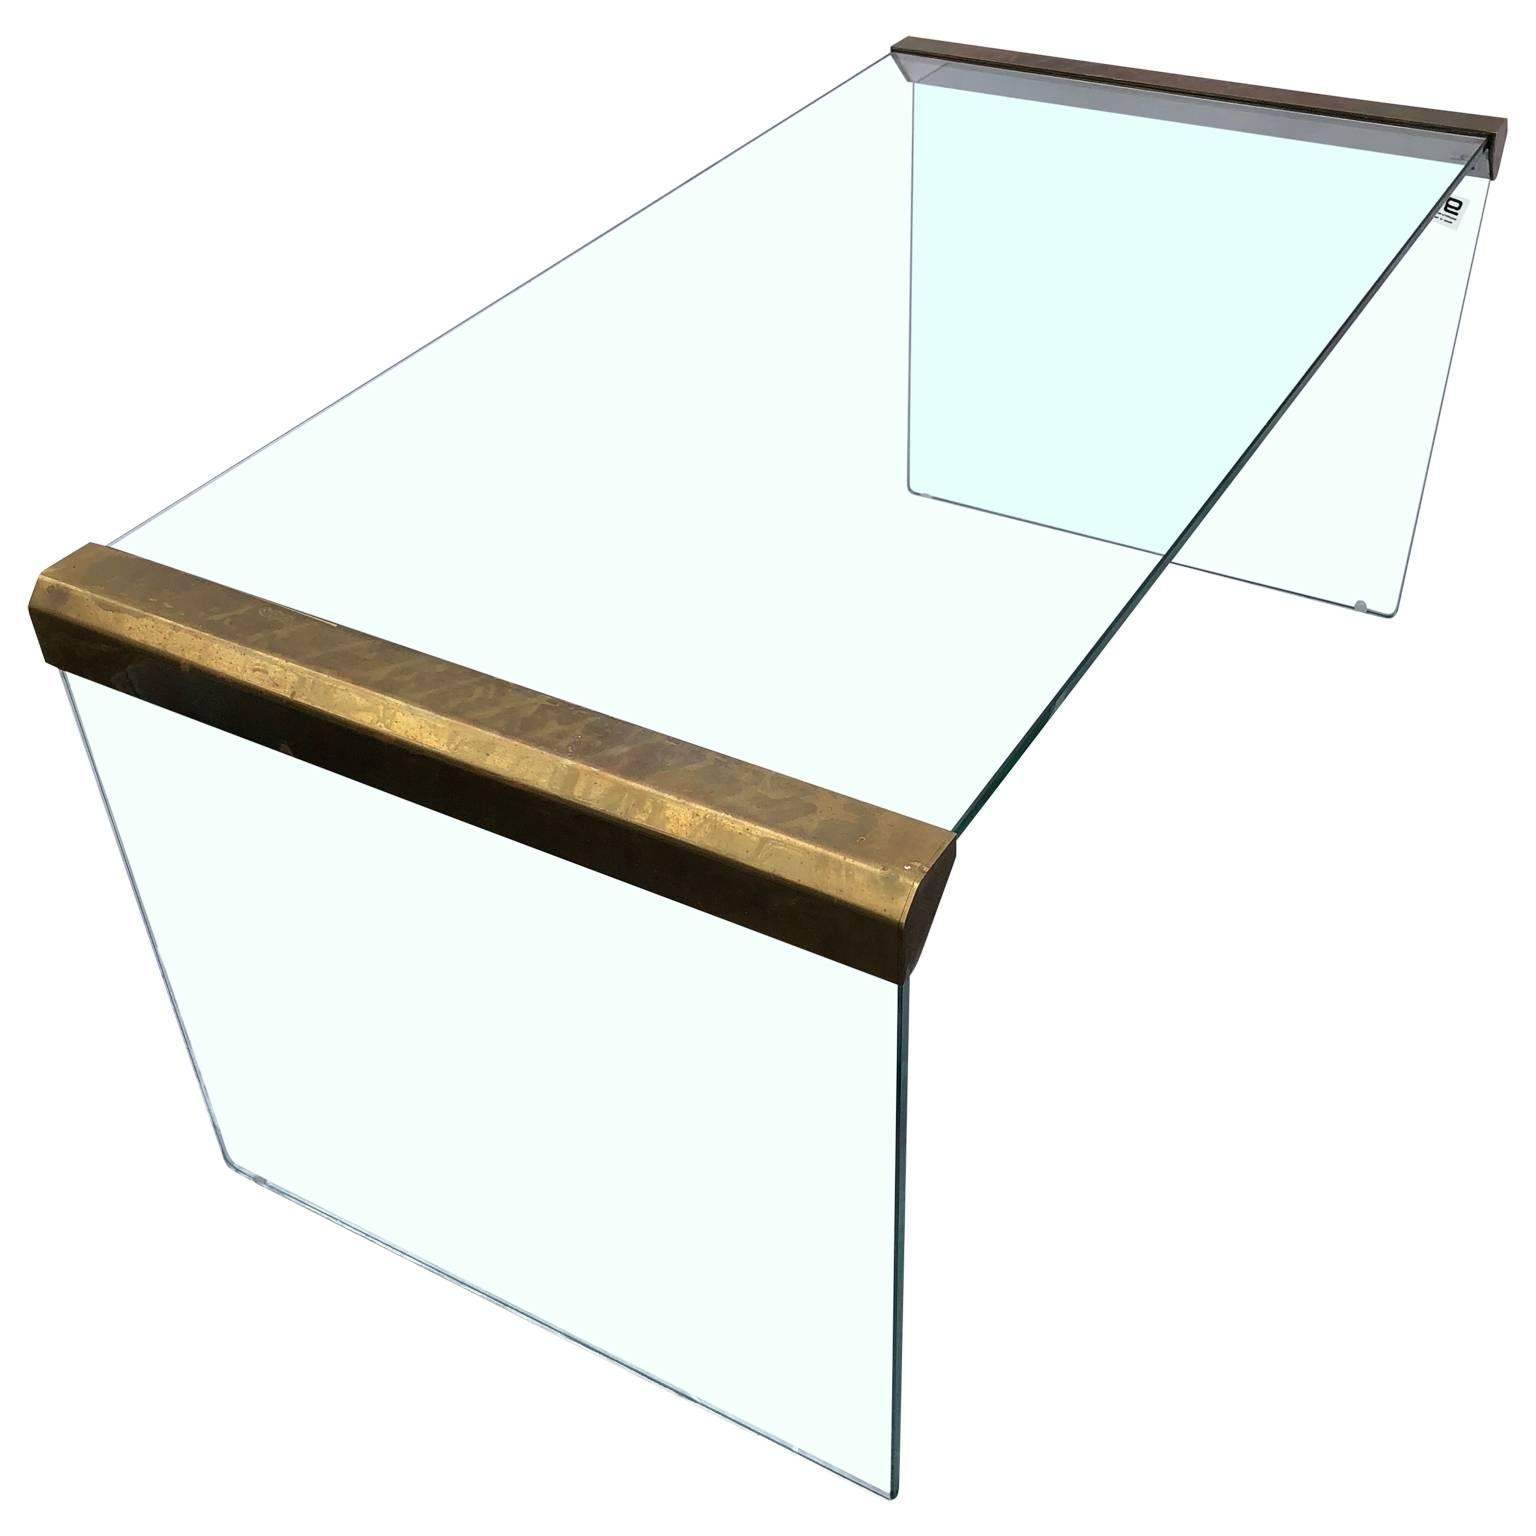 Small Italian Mid-Century Modern glass and brass cocktail or coffee table by Pierangelo Galotti and Luigi Radice, of Galotti & Radice, Cermenate, Italy.
The brass hardware's 3rd side panel, underneath is chromed, see detailed image no 5.

$125